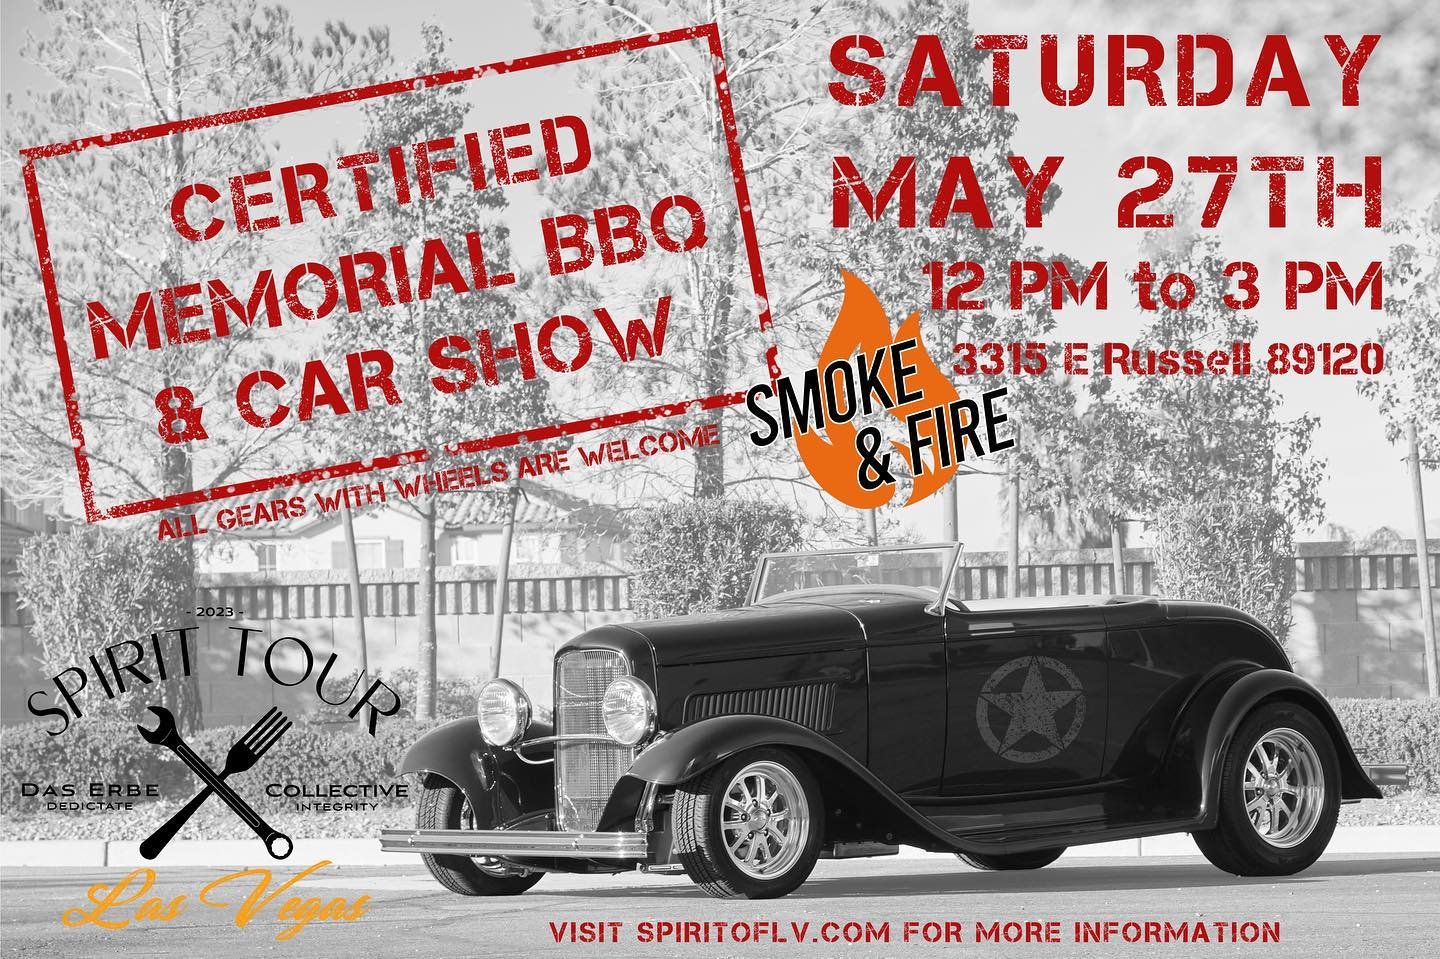 Mark your calendars, we have a SMOKIN HOT event coming up!! 🔥🥵

Join us for our &ldquo;Certified Memorial BBQ &amp; Car Show&rdquo; at @smokeandfirelv as we welcome the Veterans of Las Vegas out for bbq &amp; a good time &mdash; all gears with whee